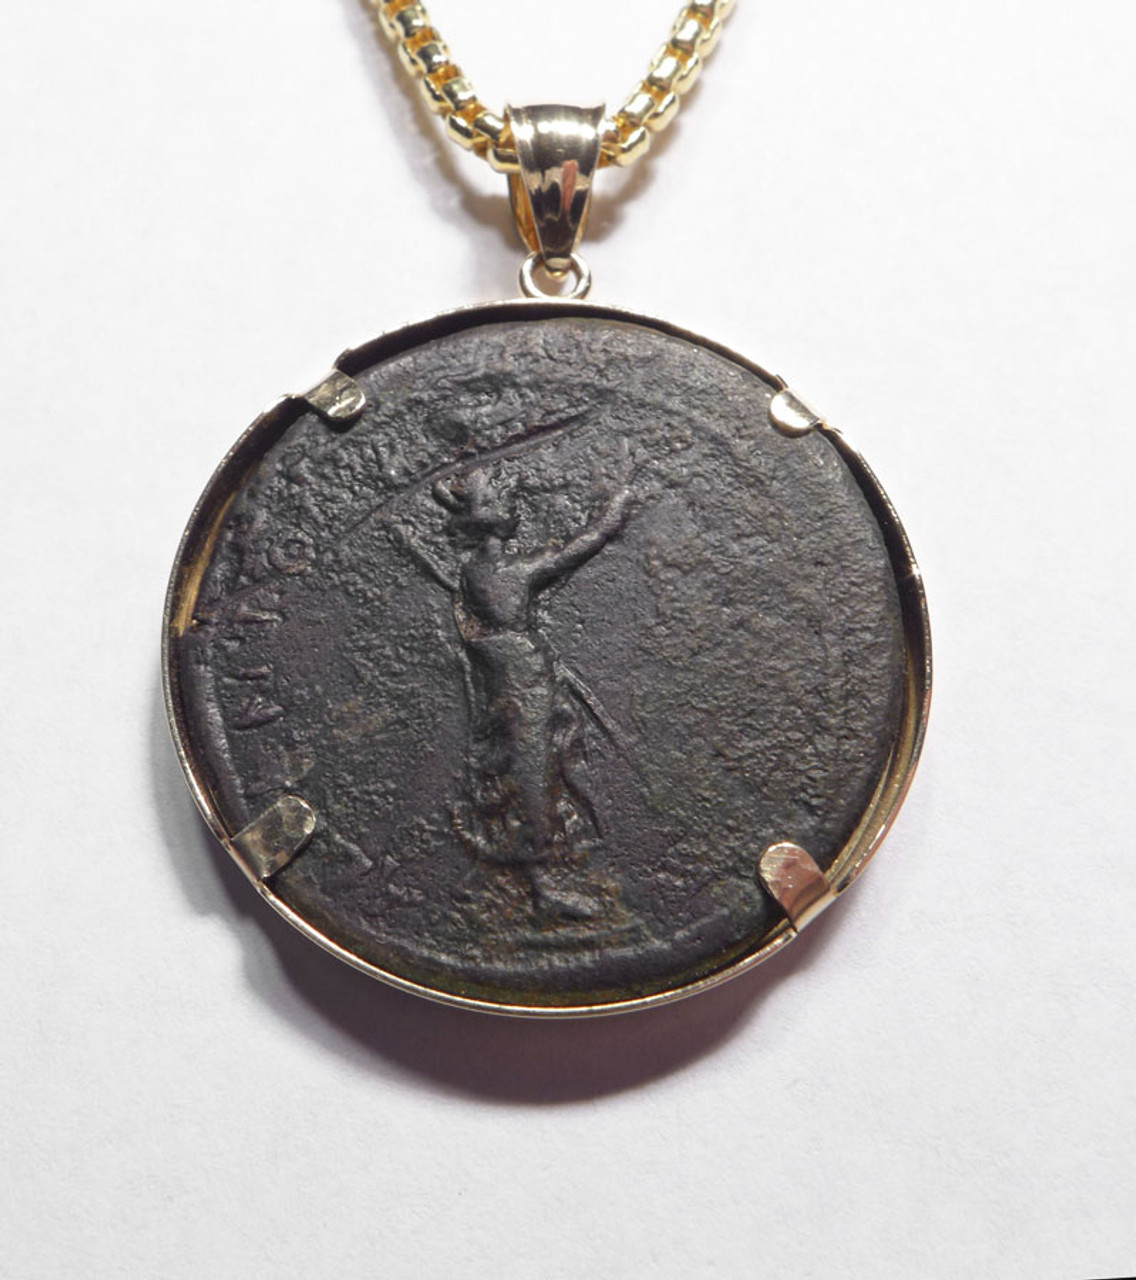 VERY RARE LARGE ANCIENT ROMAN IMPERIAL HORSE AND RIDER COIN PENDANT OF SEPTIMIUS SEVERUS IN 14KT GOLD  *CPR246